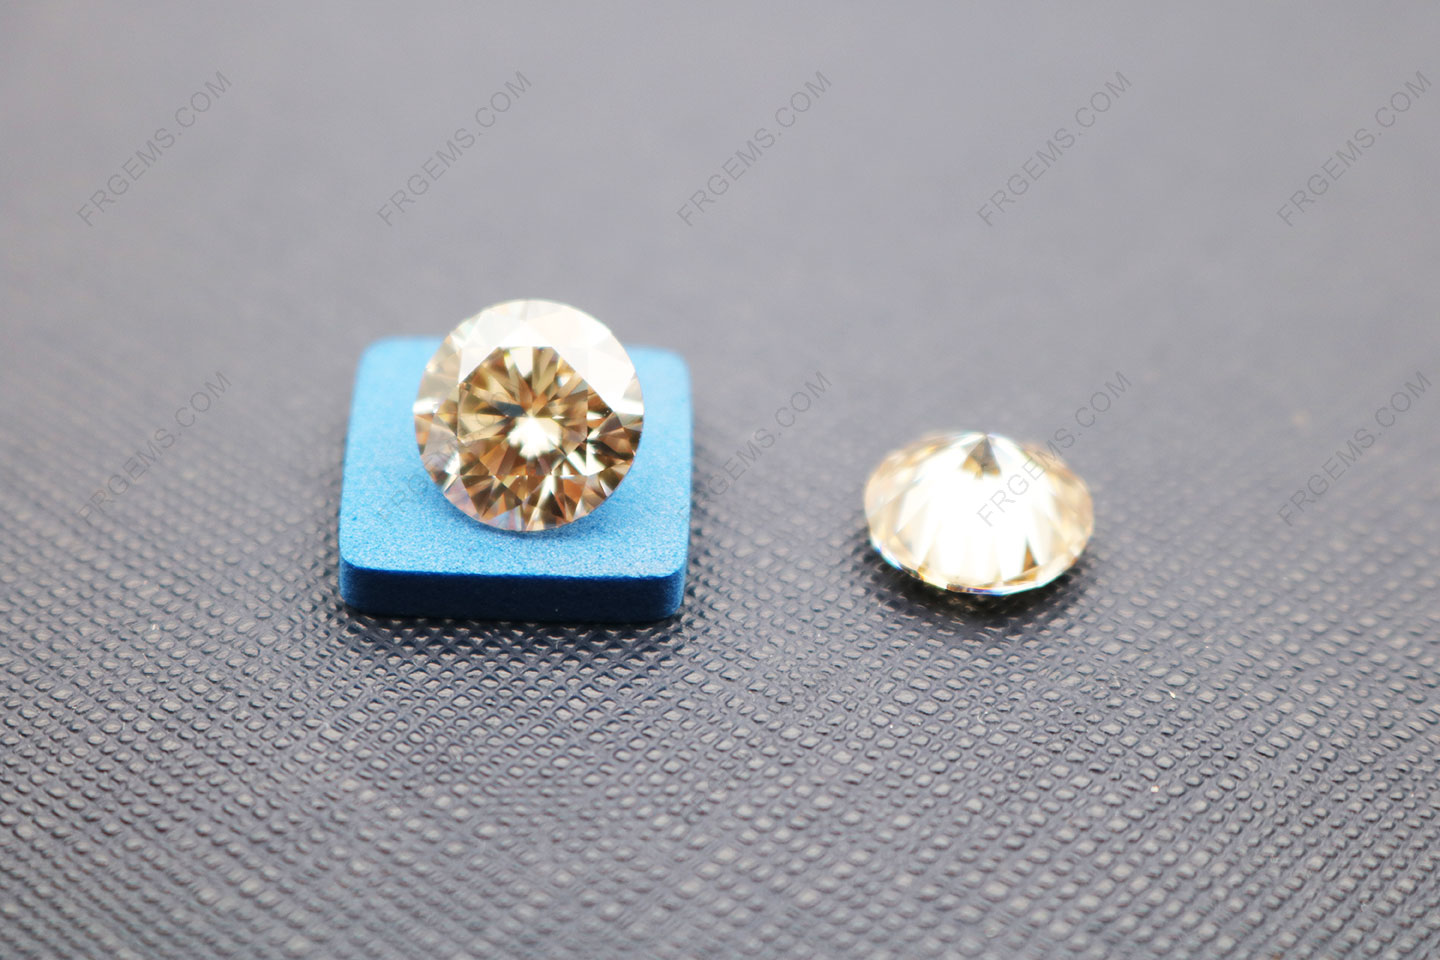 Loose Moissanite Champagne Color Round Shape Faceted Brilliant Cut 10mm 4ct weight gemstones